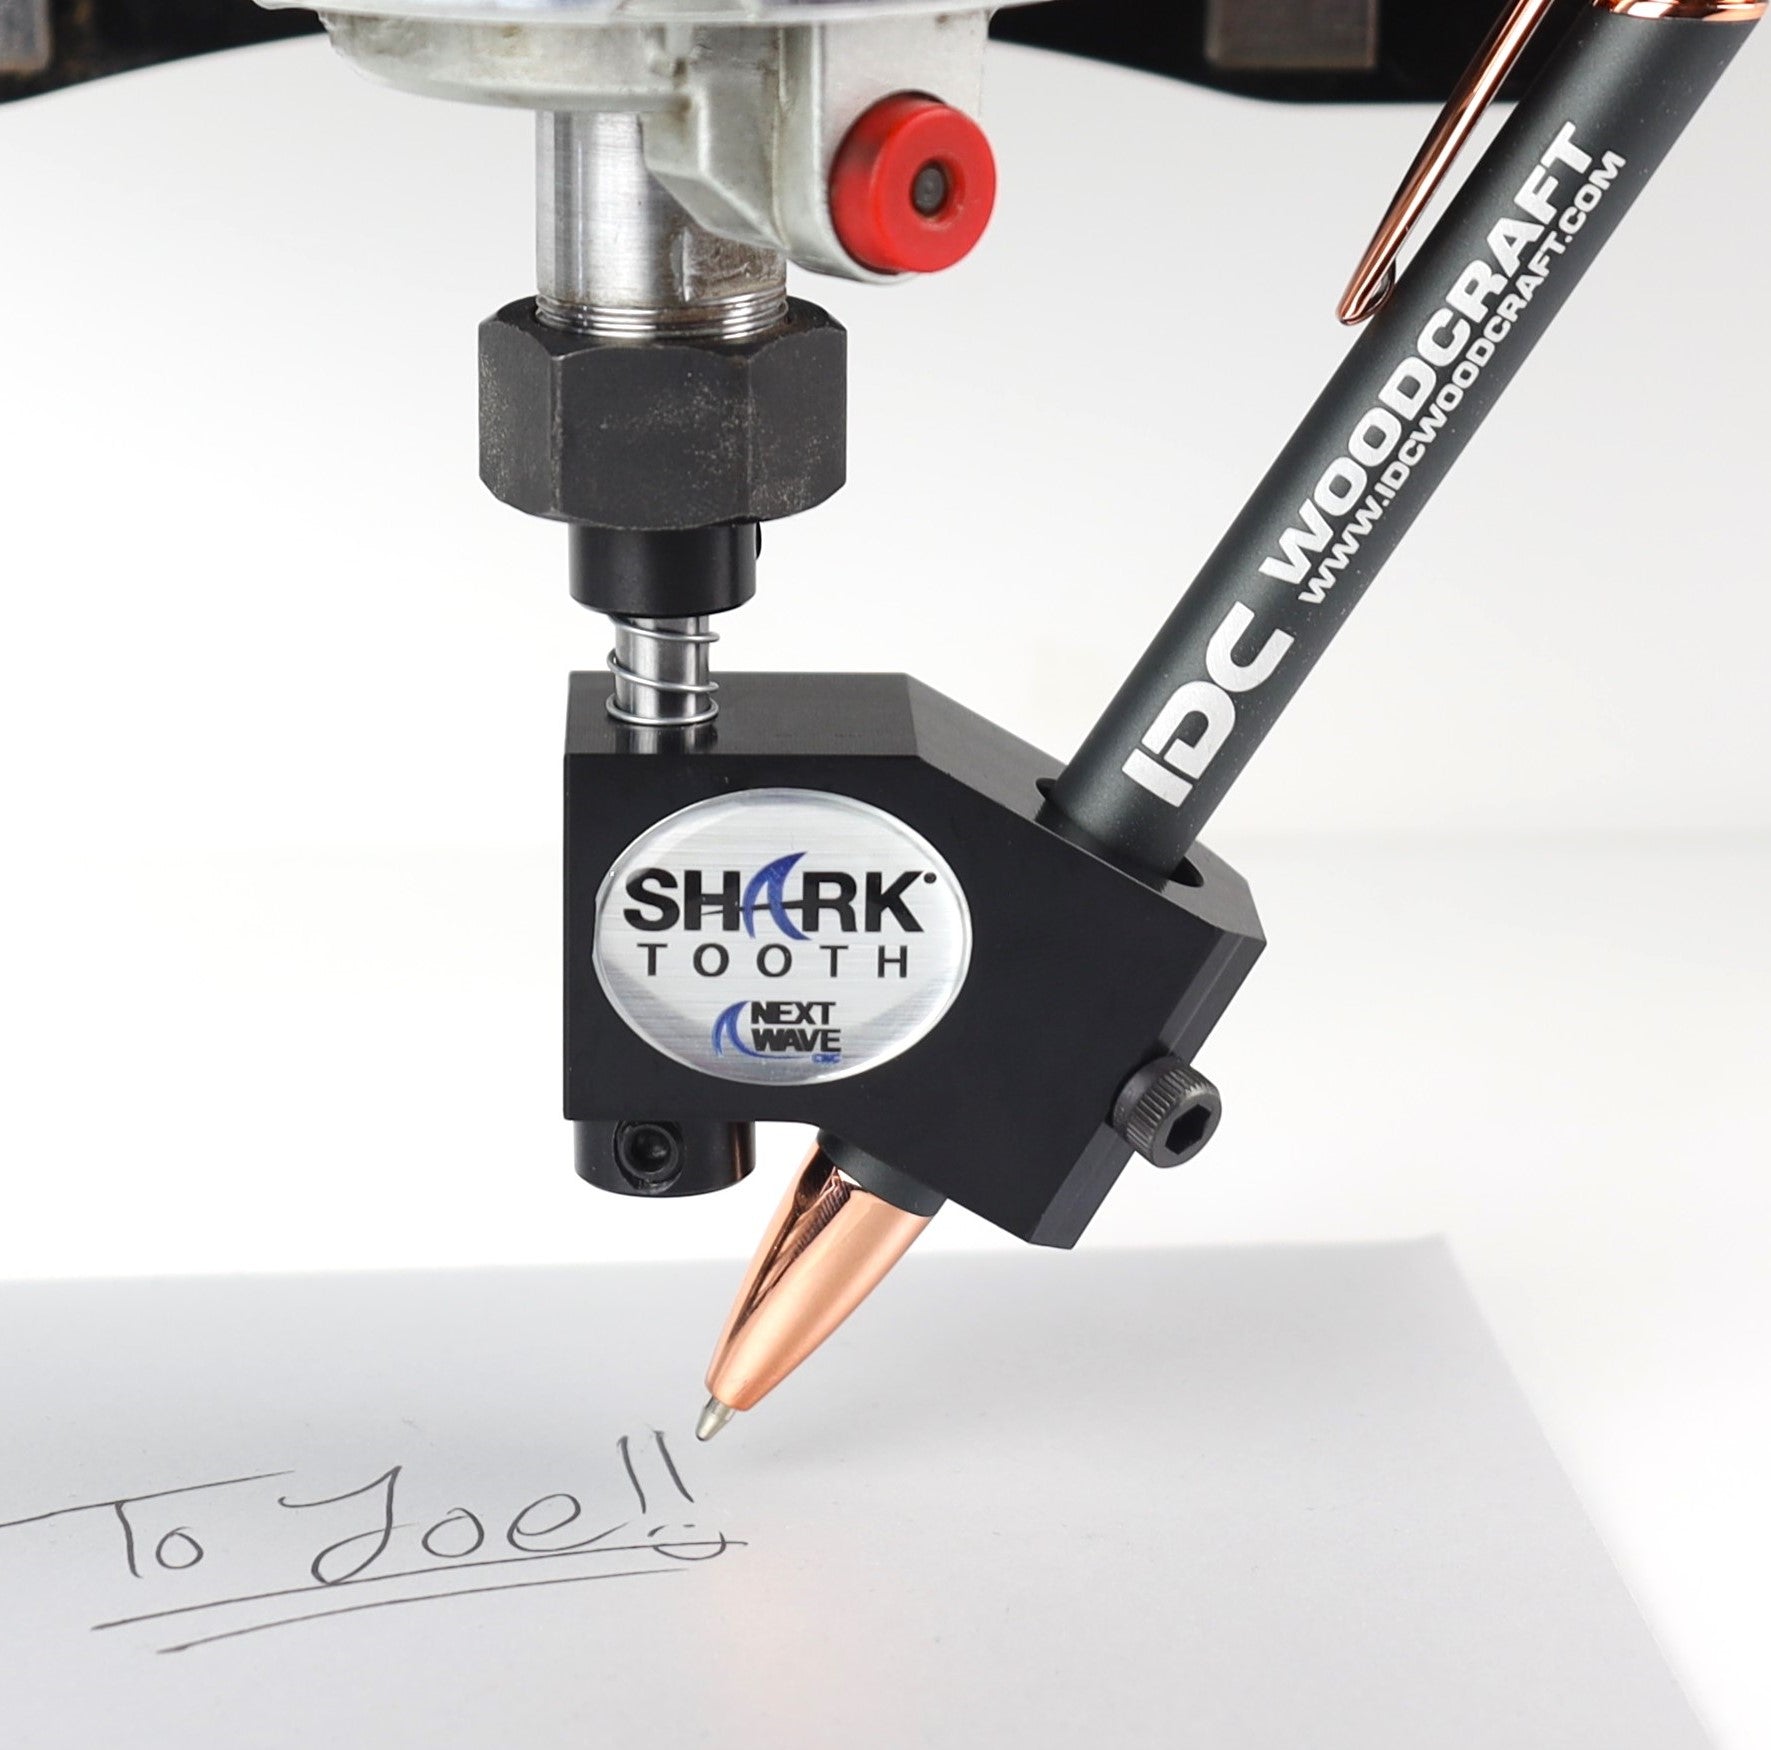 Shark Tooth Drawing/Writing Tool For CNC Routers, 1/4 Shank